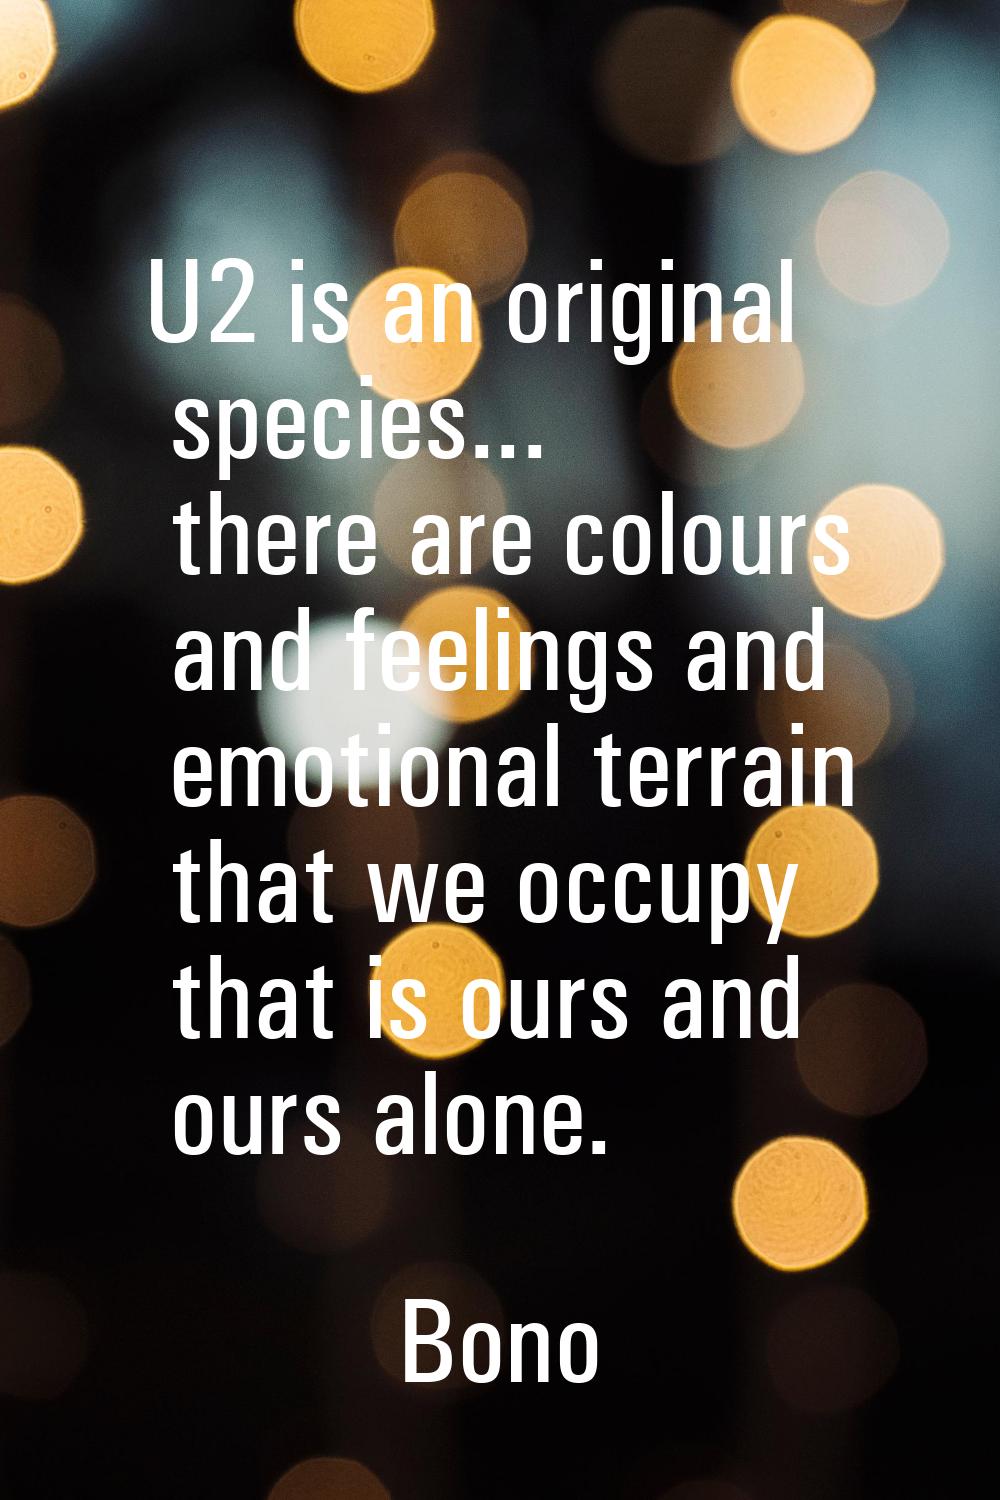 U2 is an original species... there are colours and feelings and emotional terrain that we occupy th